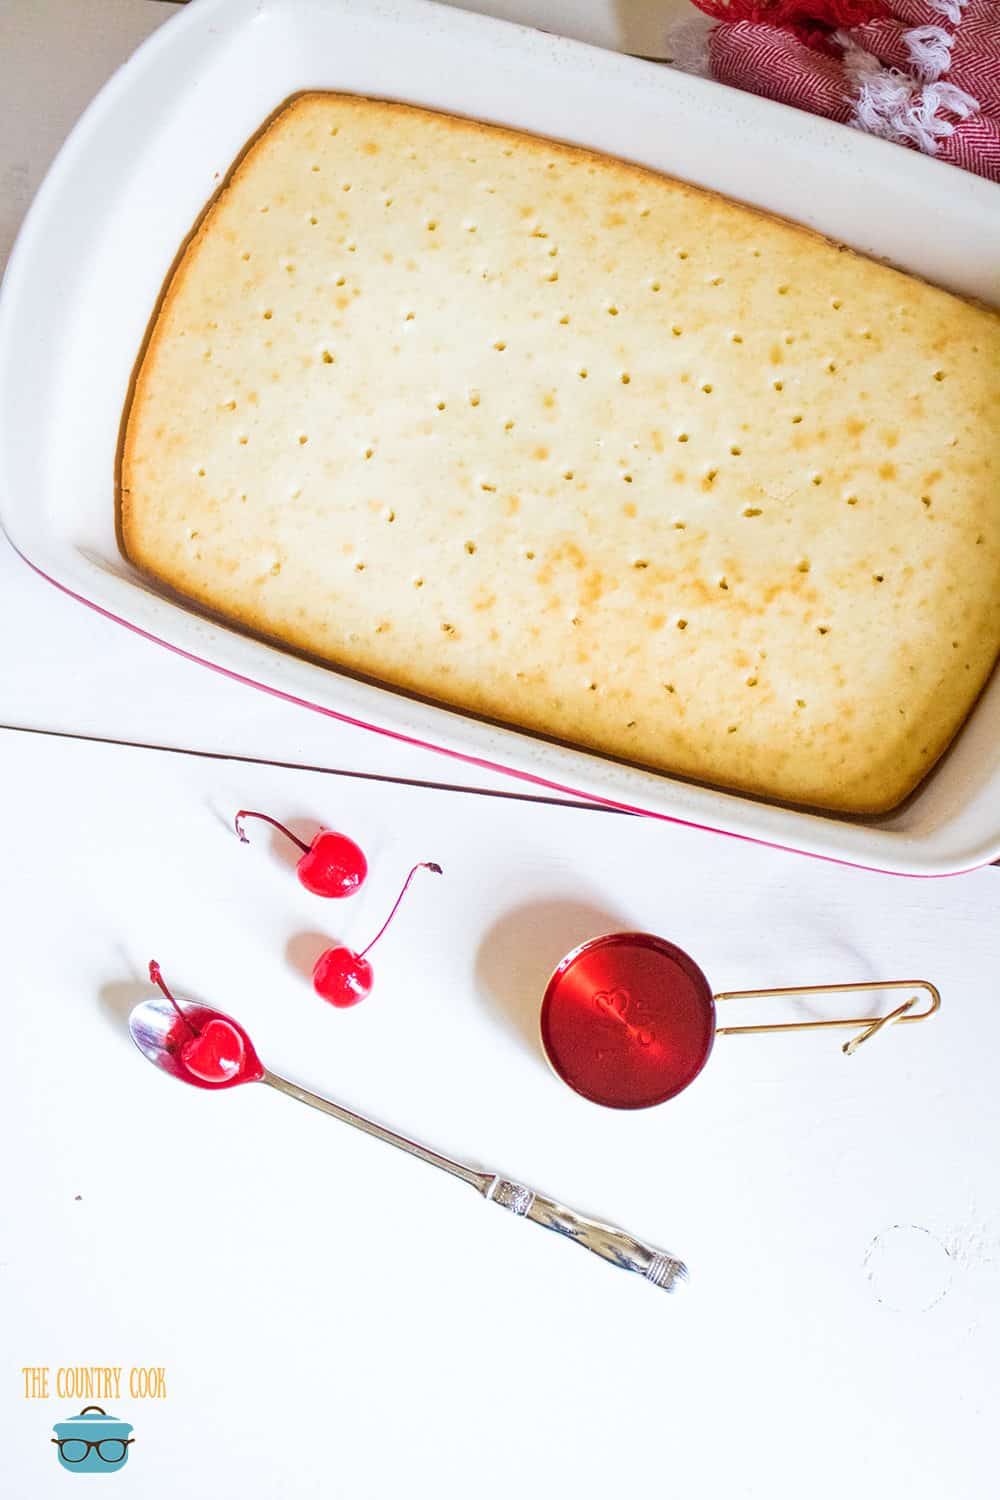 cooled white cake in a 9x13-inch baking dish with poked holes.